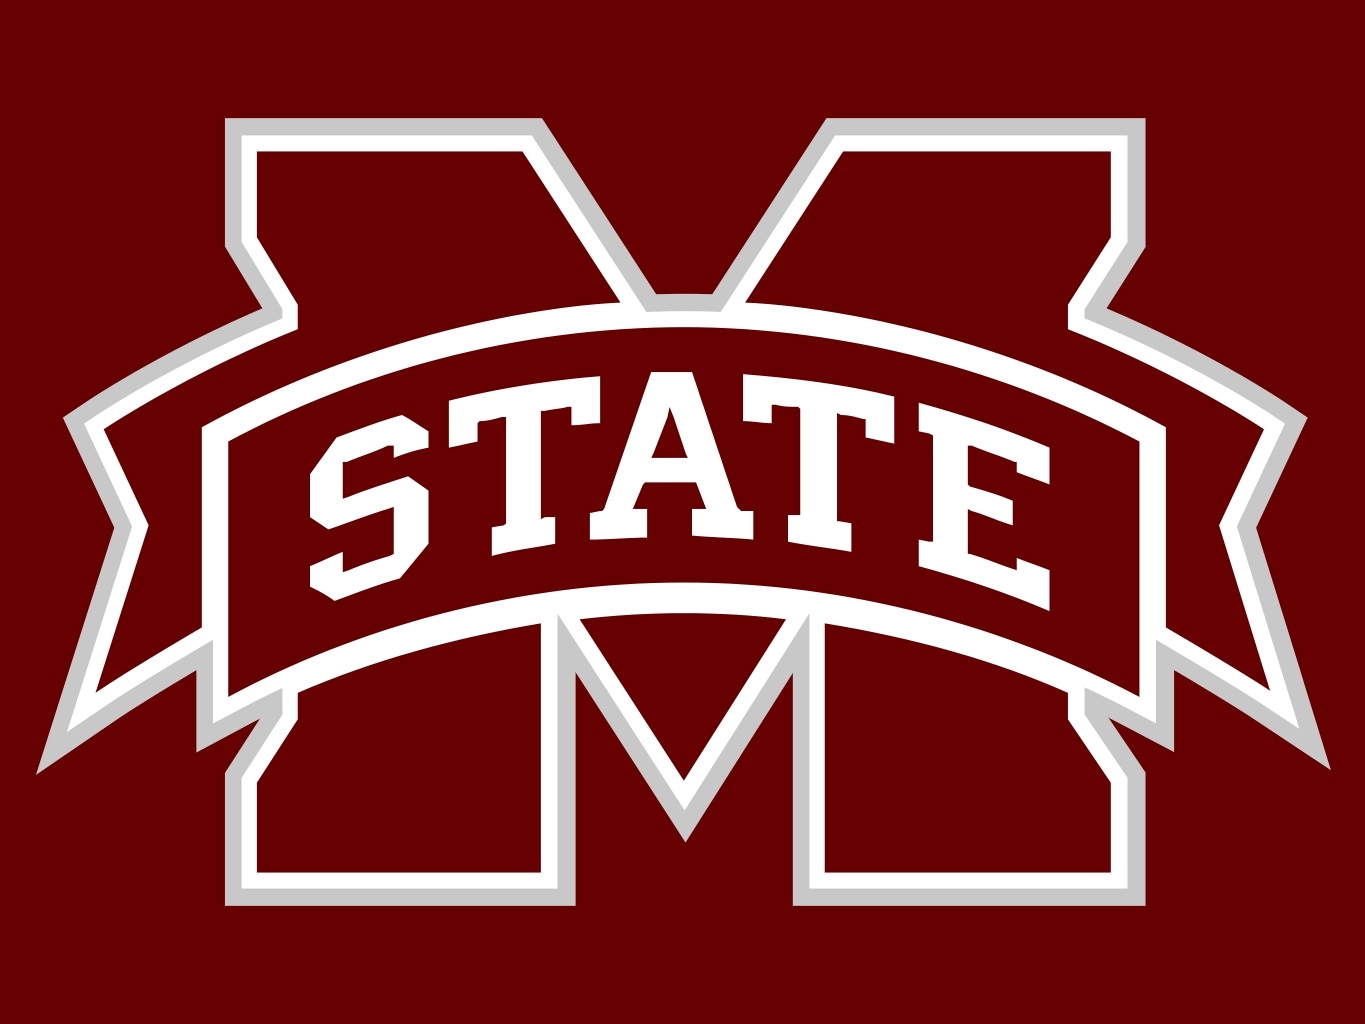 Mississippi State sets Cross Country schedule